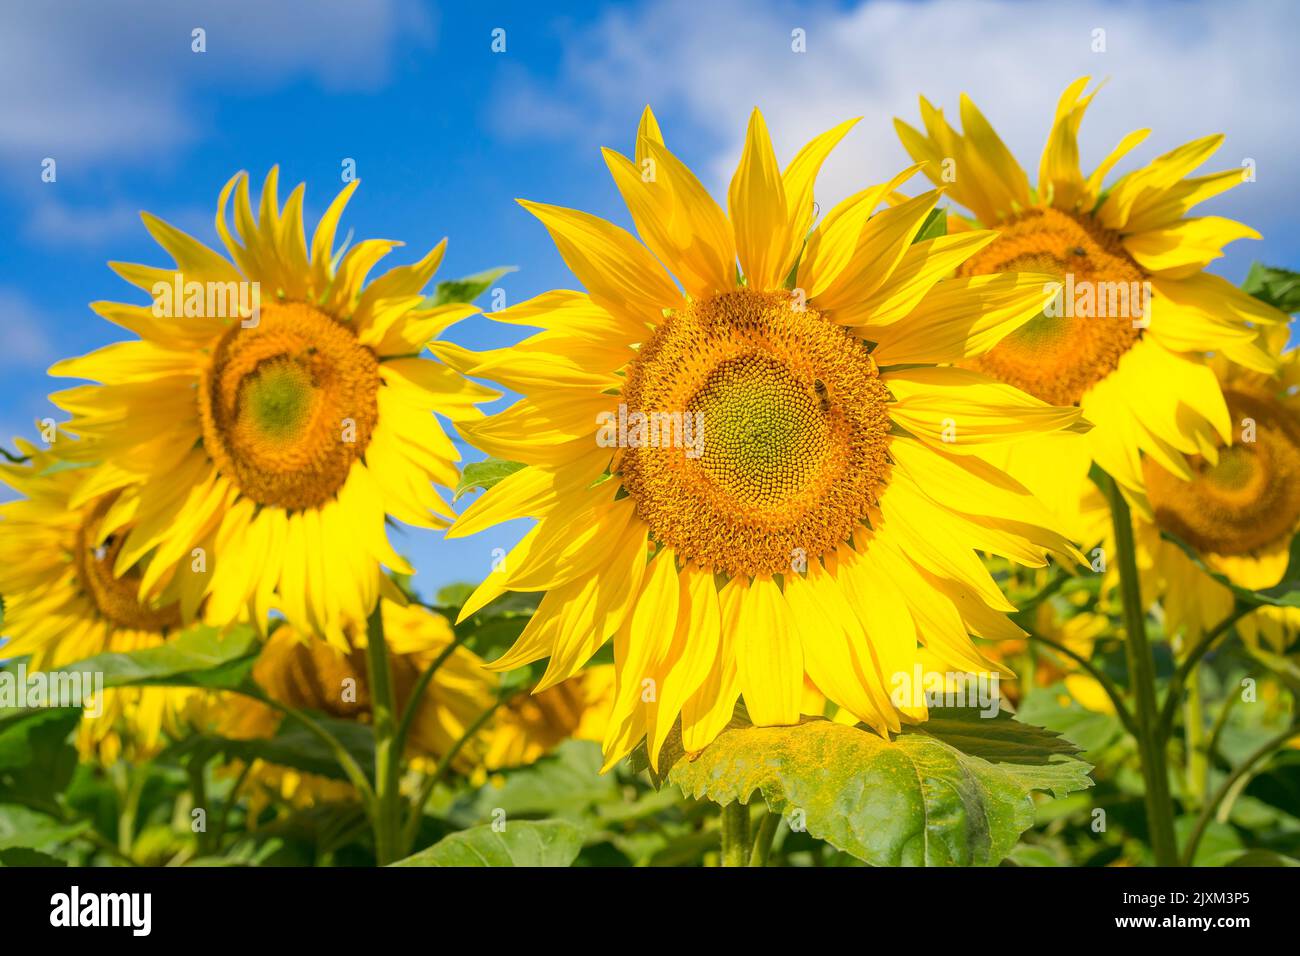 front view close-up sunflower head in a field of sunflowers and a blue sky background. Stock Photo